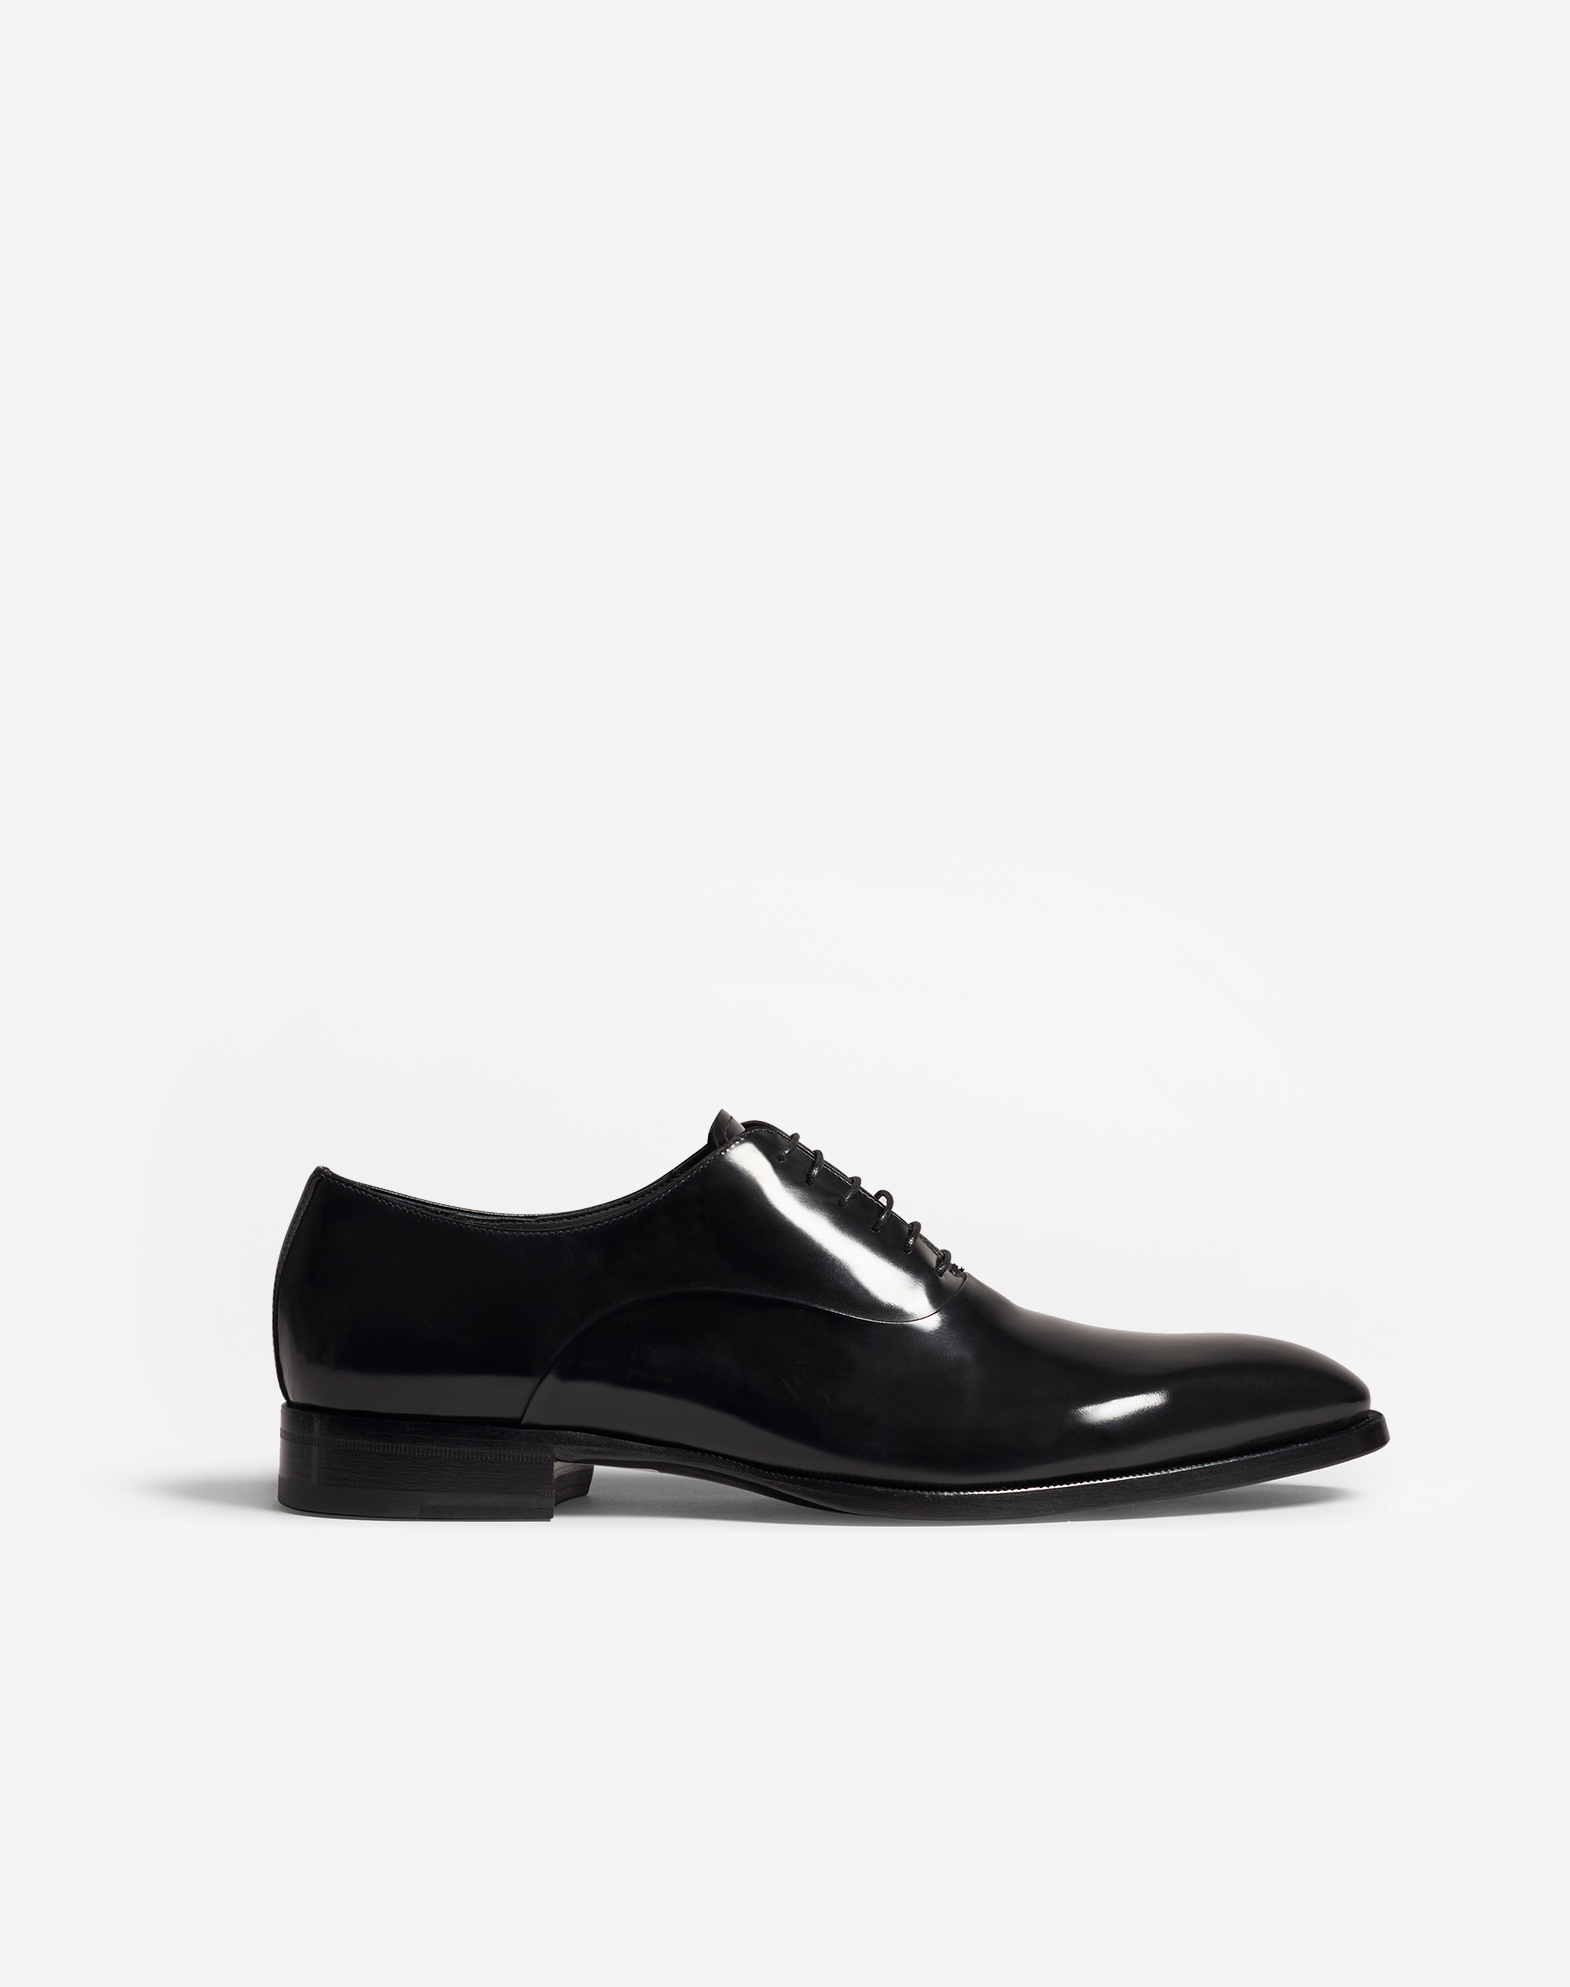 DUNHILL EVENING OXFORD SHOES